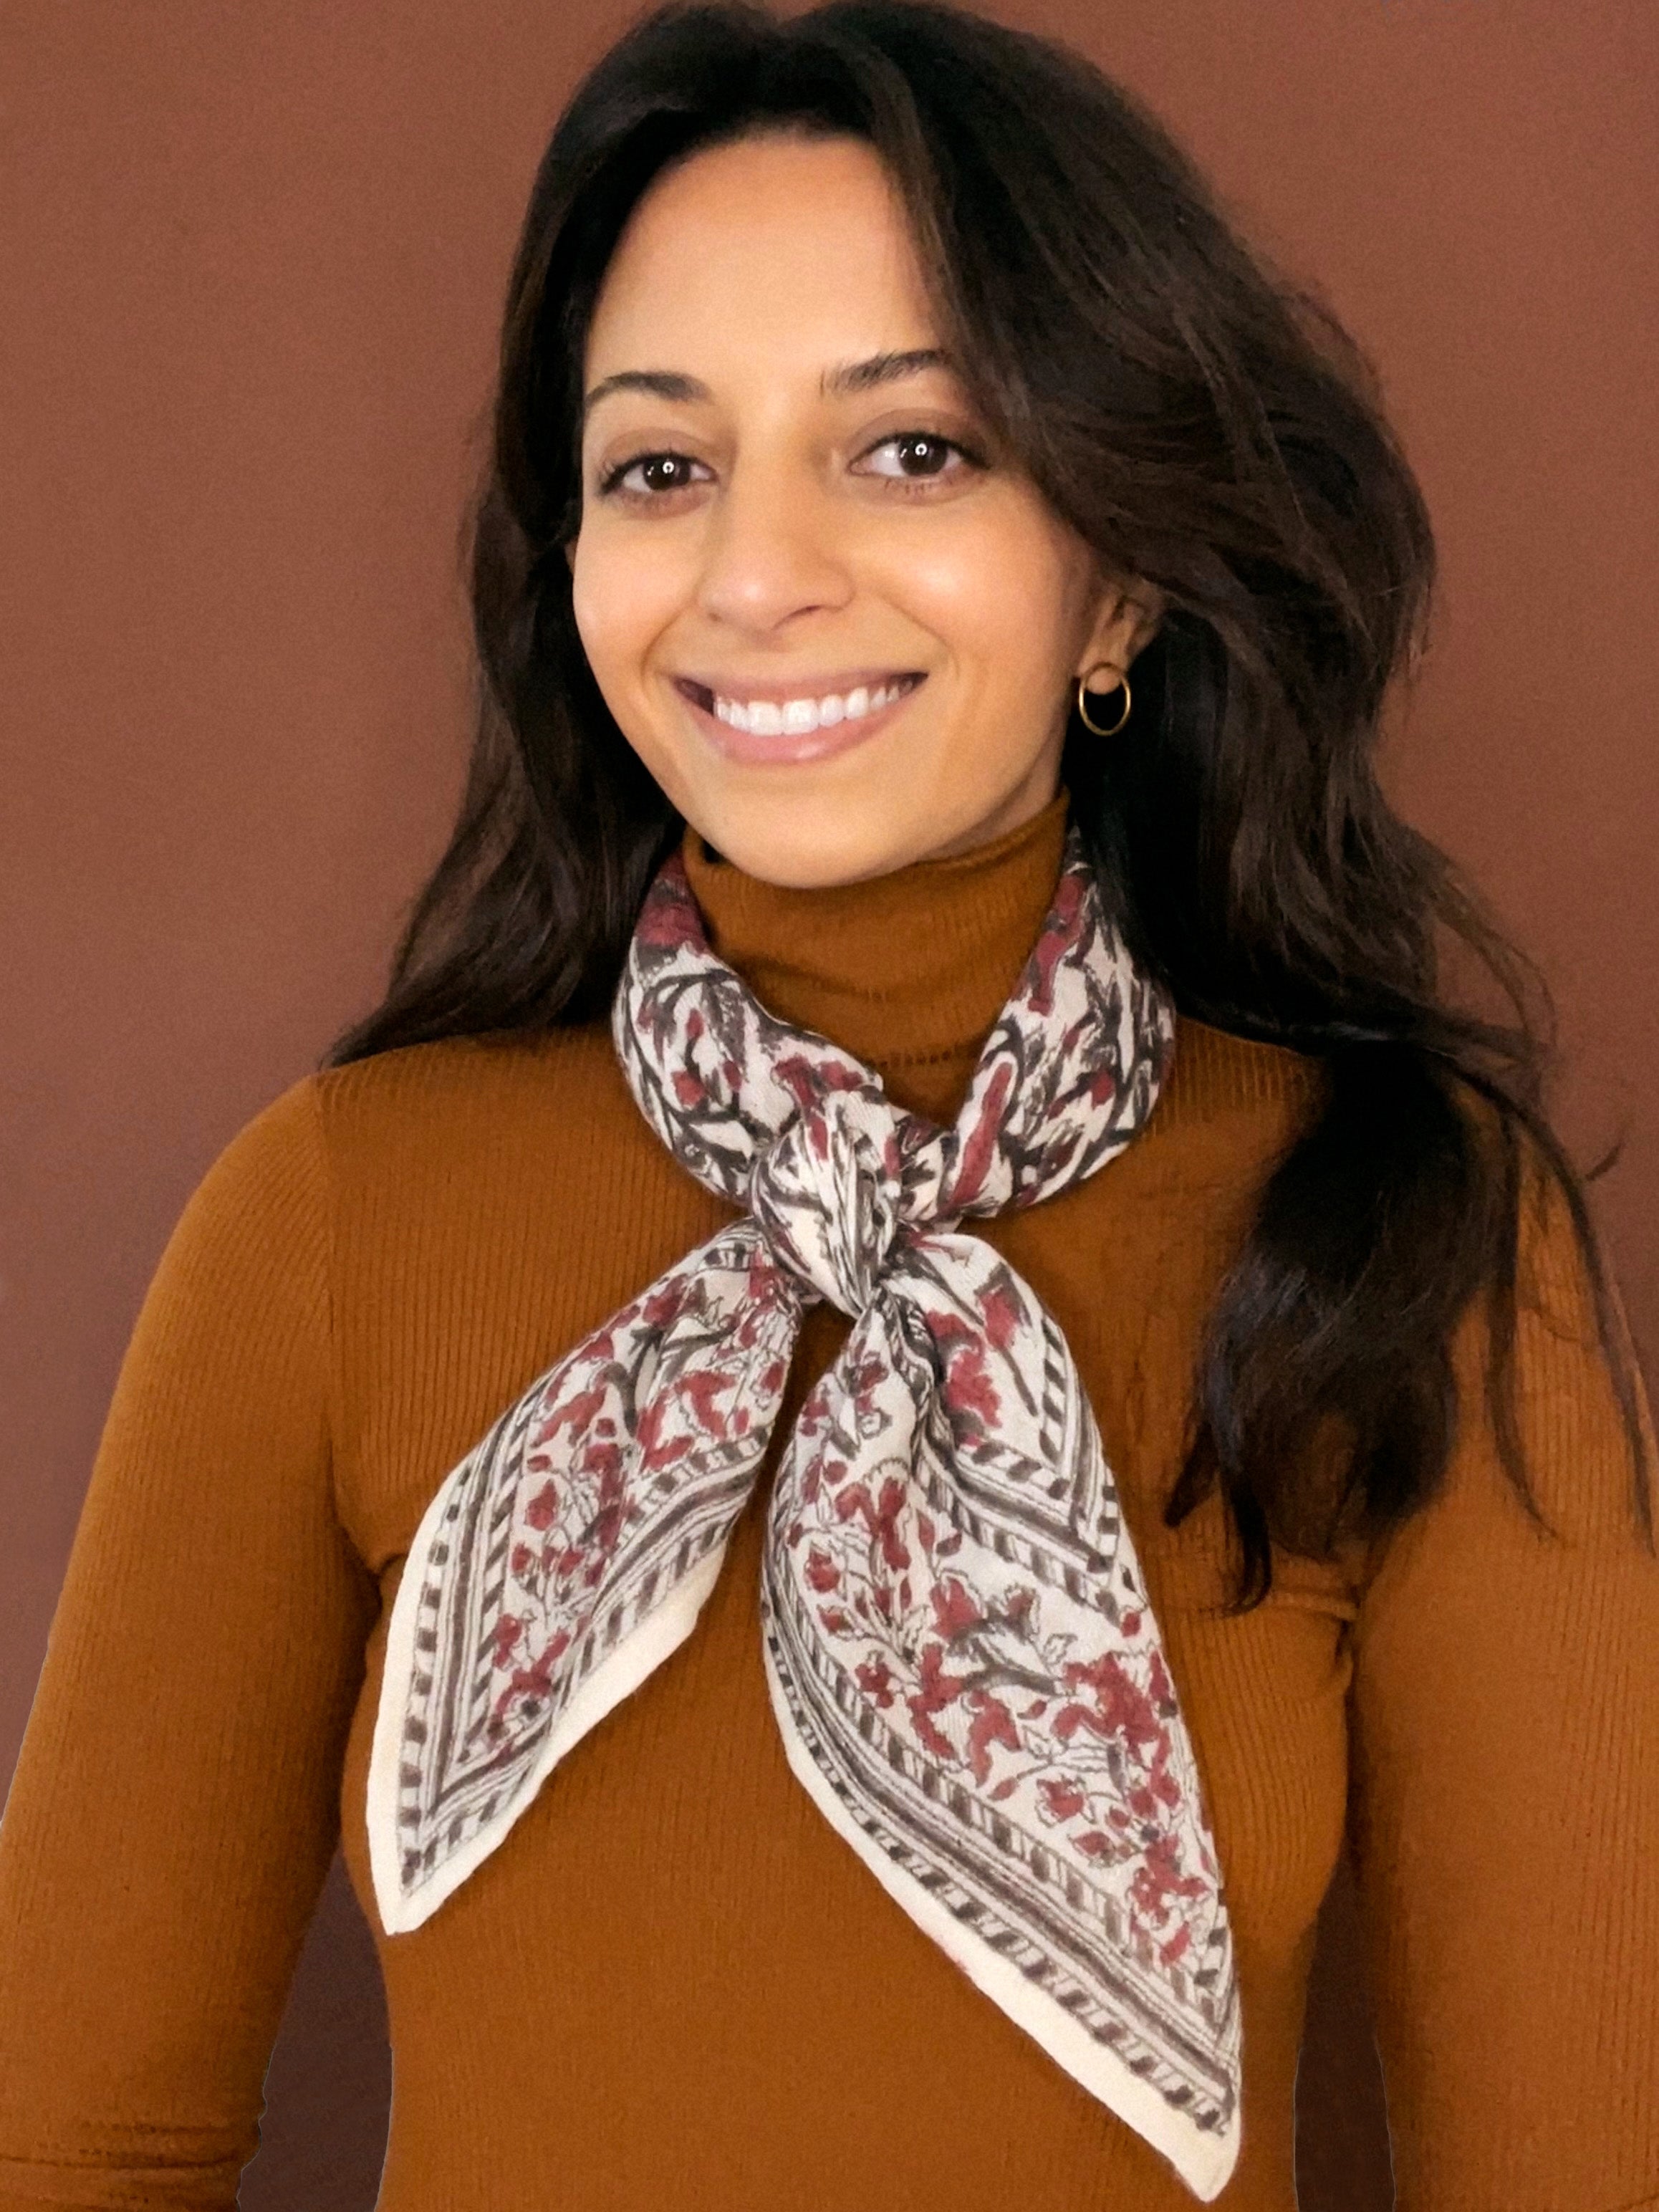 Model wearing the block printed Lana bandana tied around the neck against a brown background